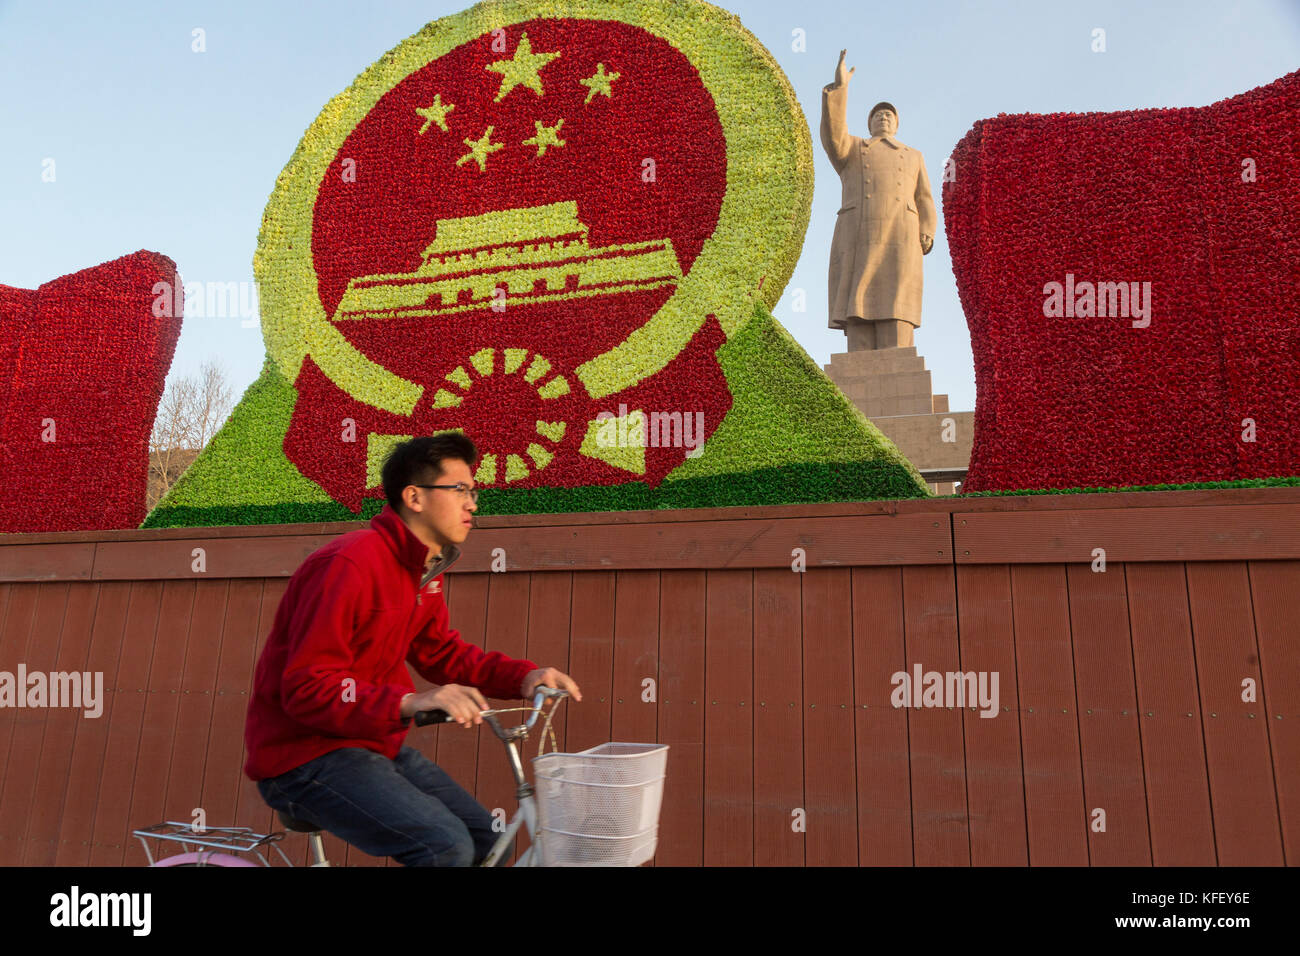 A Chinese man rides a bicycle past a huge monument to Mao Zedong in Kashgar city, Xinjiang Uygur Autonomous Region of China Stock Photo